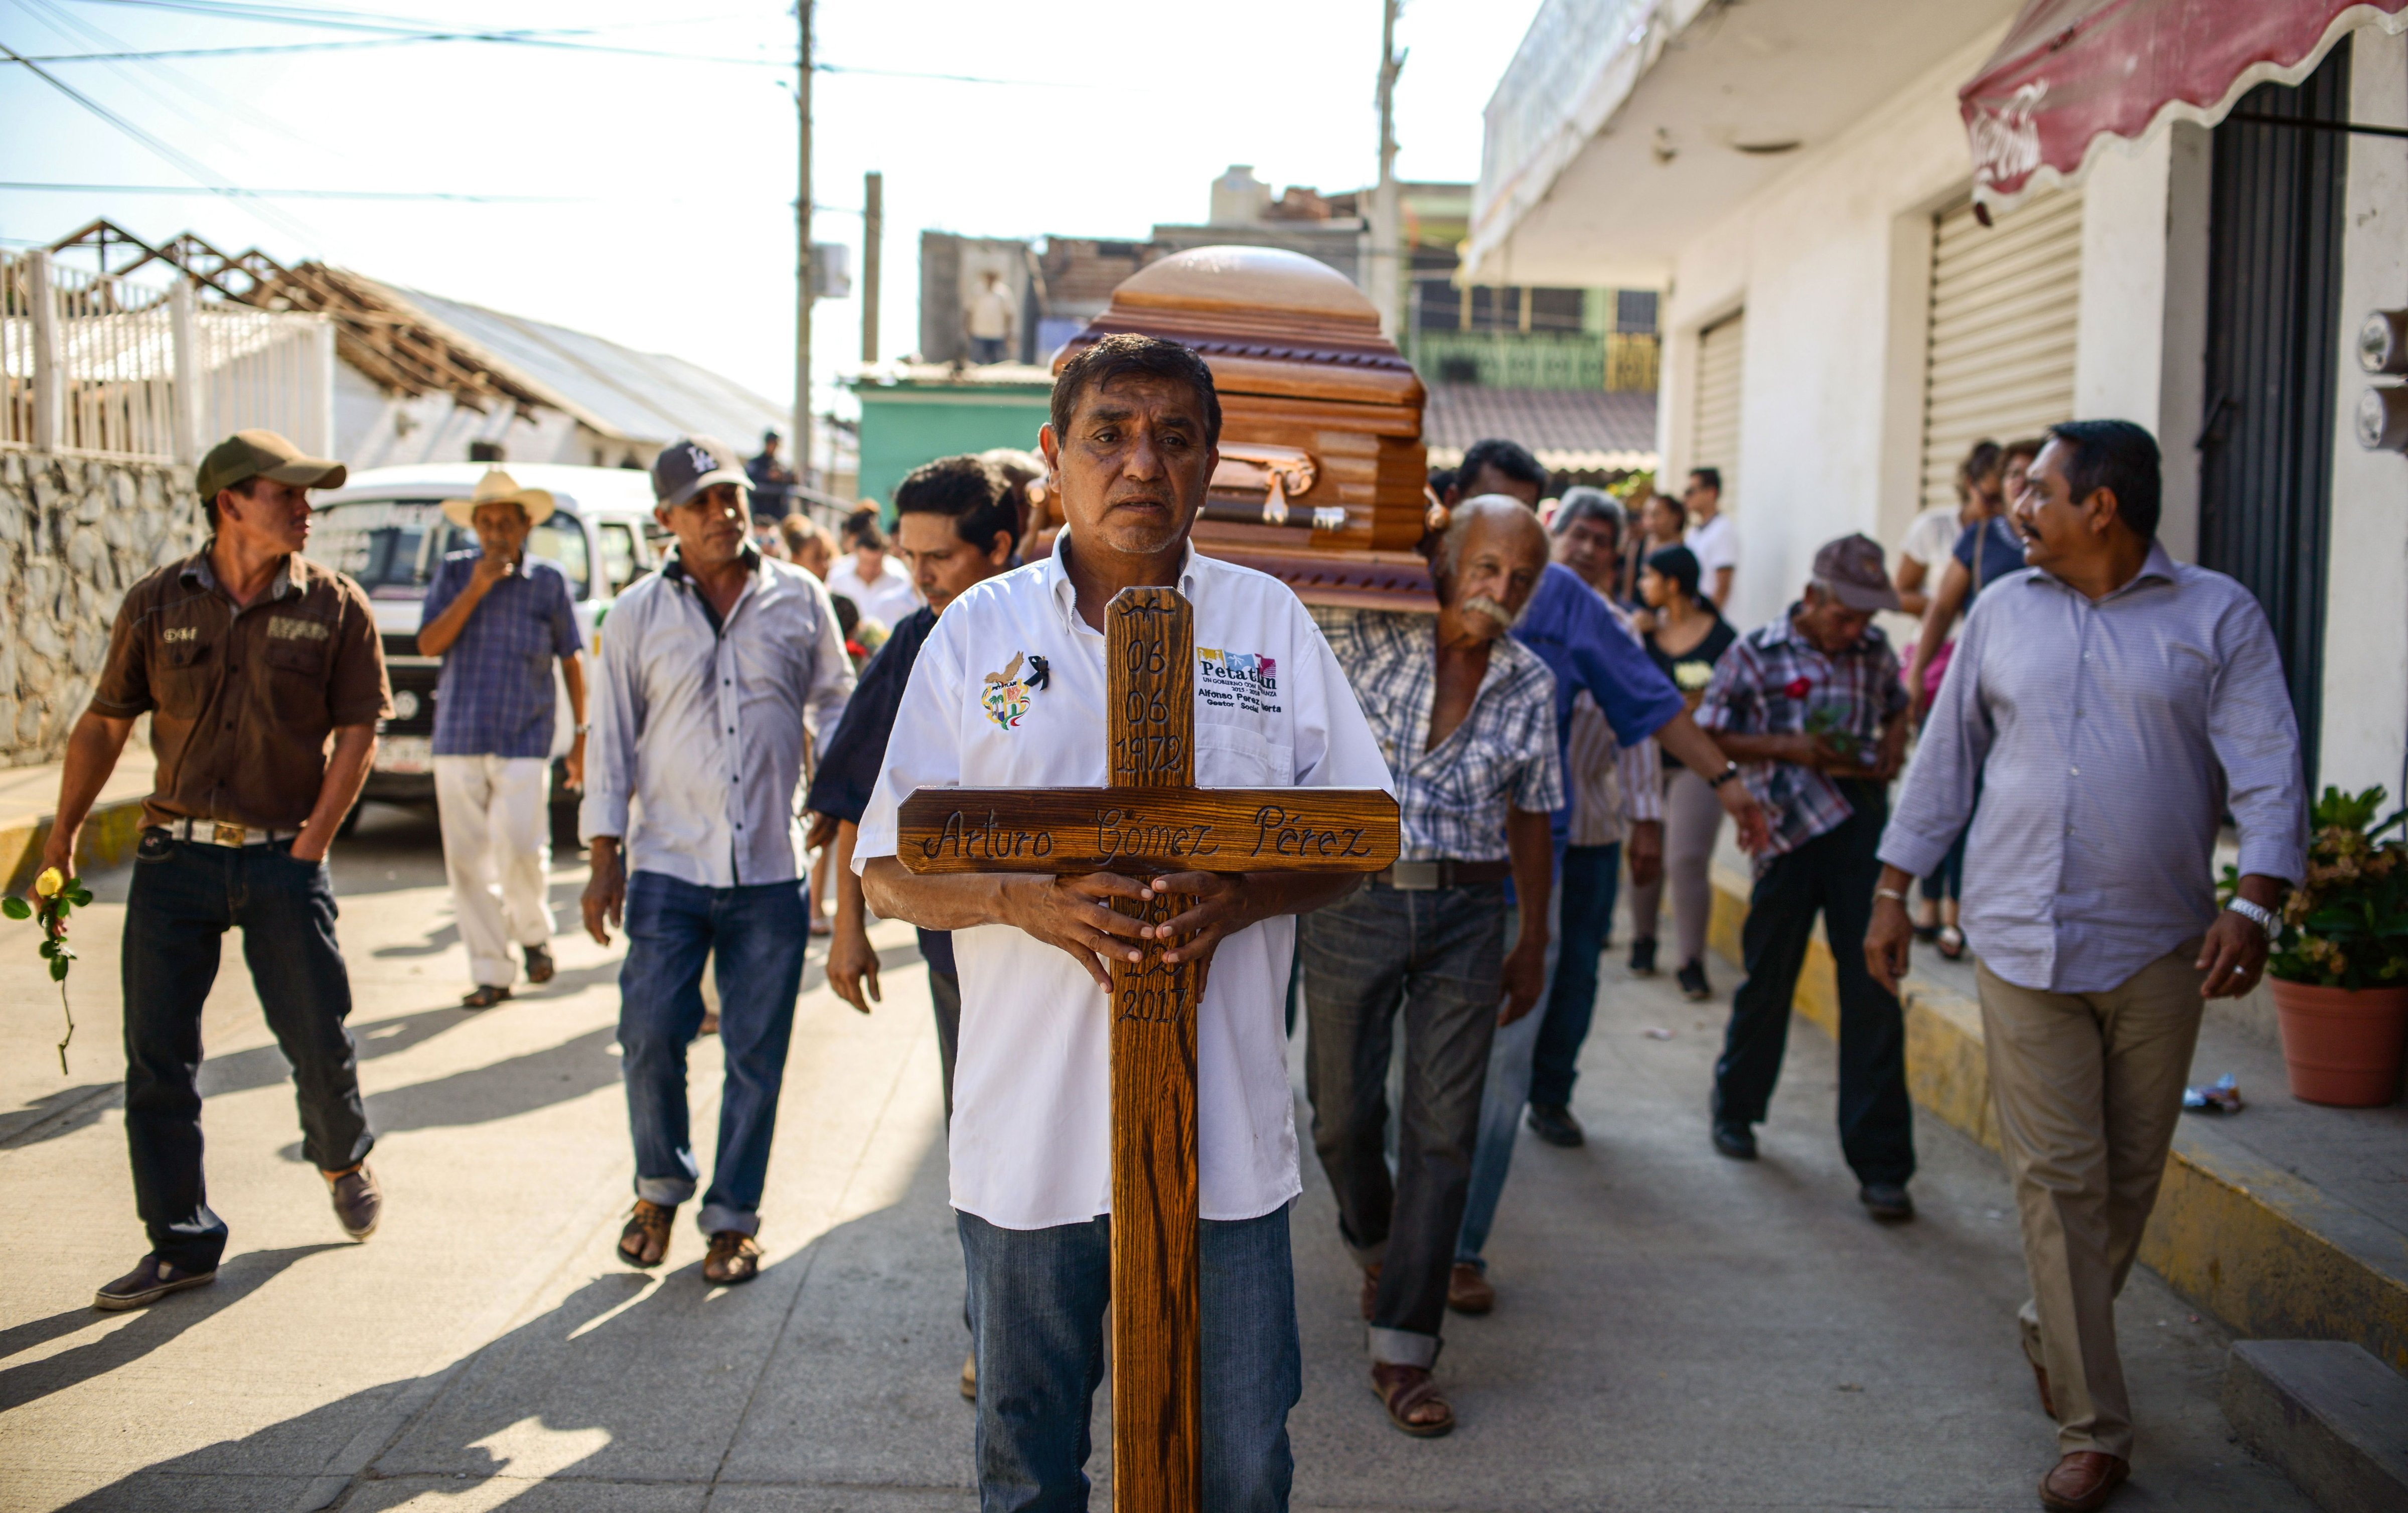 Relatives and friends of the mayor of the Mexican community of Petatlan, Arturo Gomez, carry his coffin during his funeral in Petatlan, Guerrero State, on December 29, 2017 a day after he was shot dead while dining at a restaurant.
                      An armed group killed mayor Gomez in the convulsed state of Guerrero in southern Mexico, according to the security spokesman for the Guerrero government Roberto Alvarez. (Francisco Robles 
                       – AFP/Getty Images)